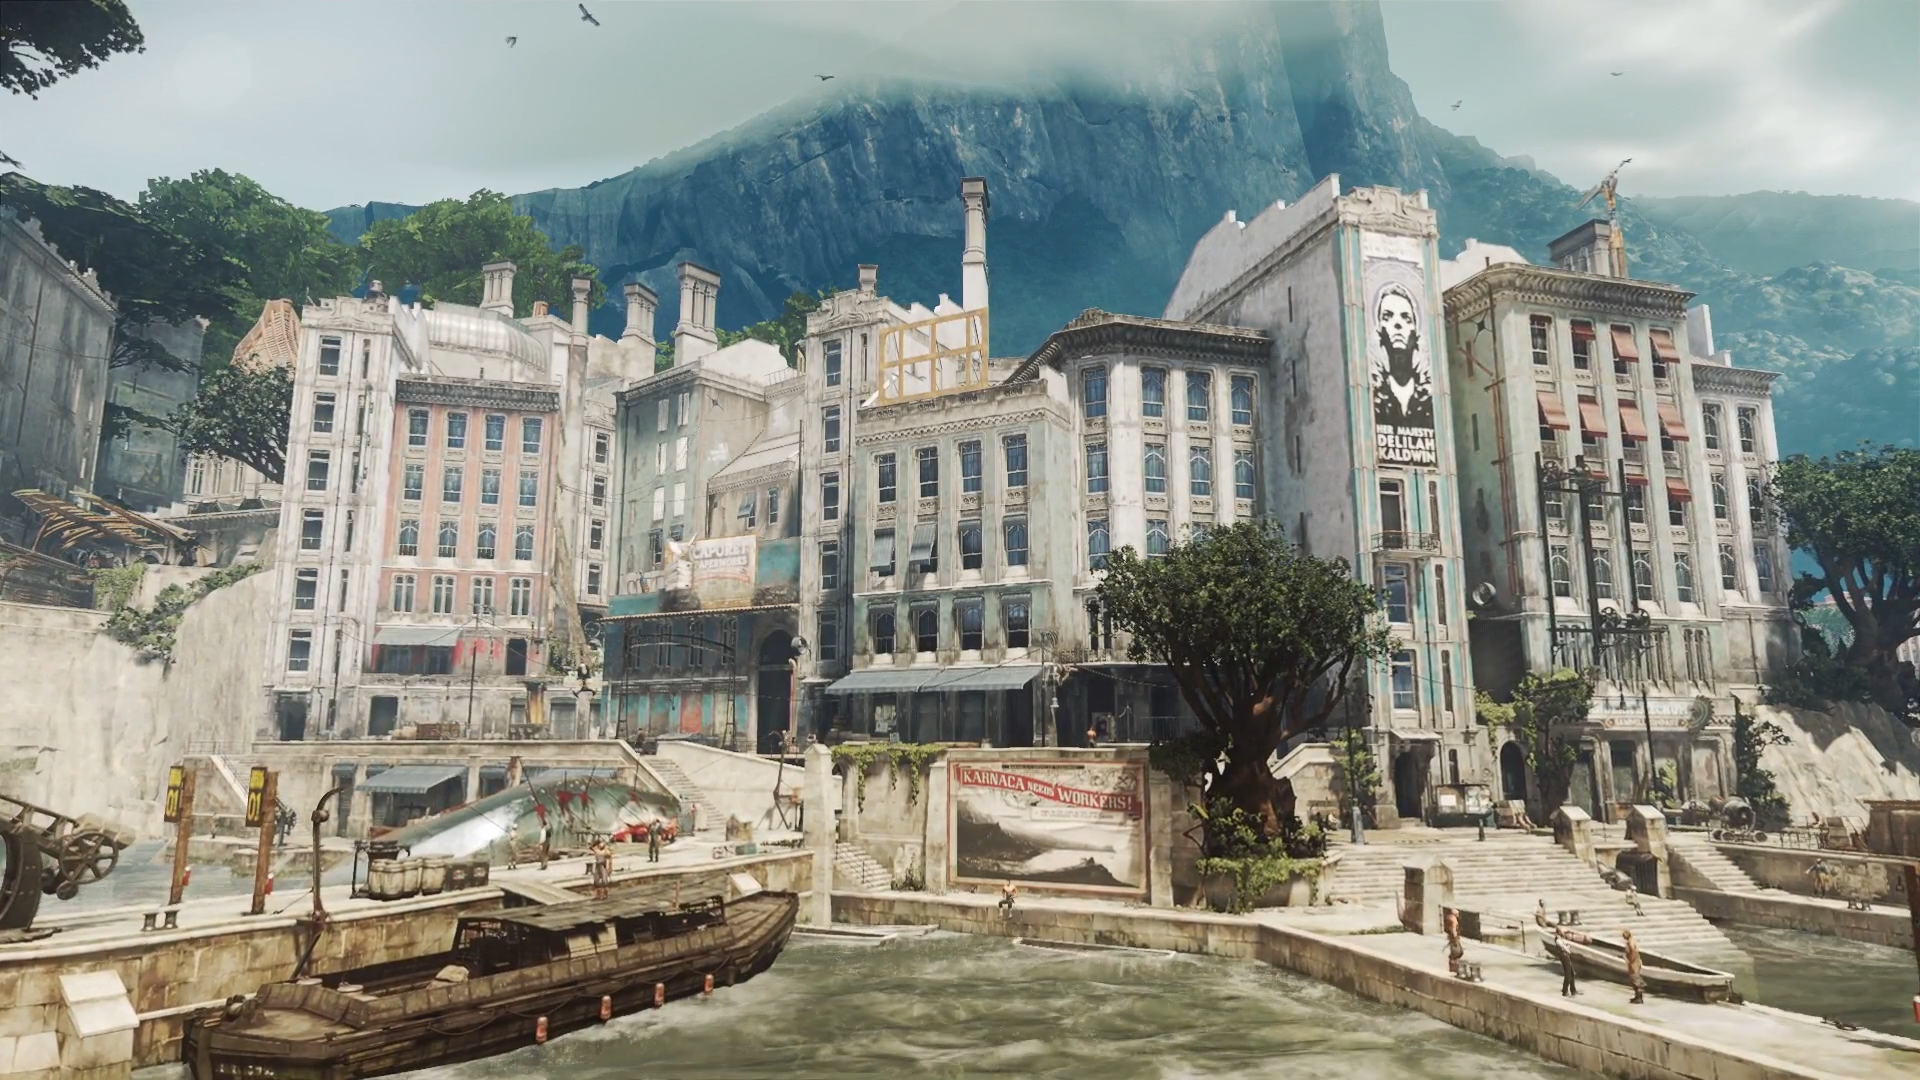 Dishonored 2 Guide/Walkthrough - Where's All the Coin?